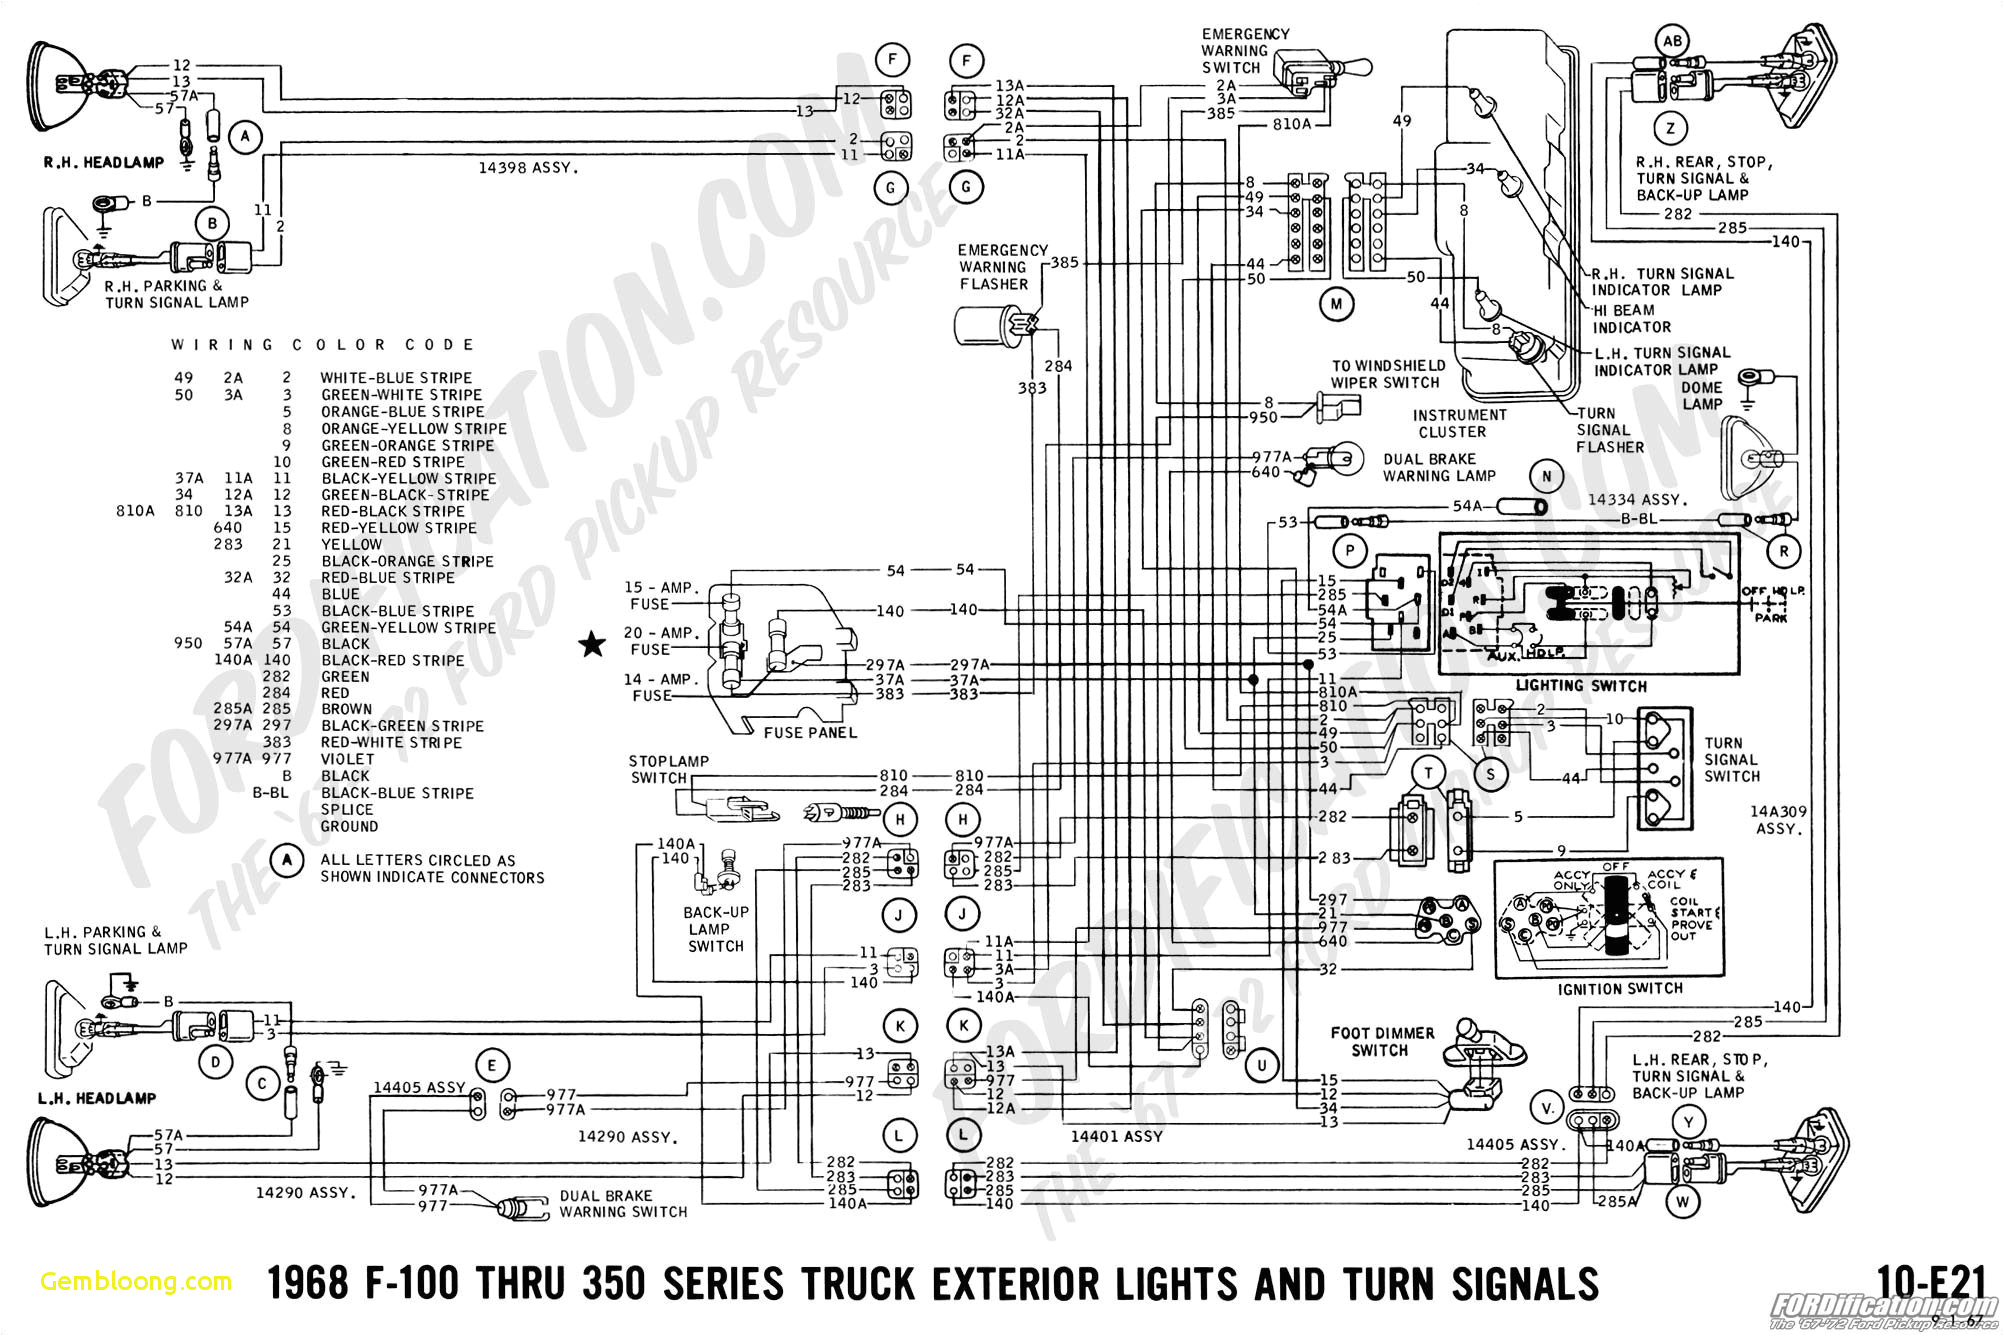 90 ford mustang wiring diagram free picture wiring diagrams value 01 mustang convertible wiring diagram free picture